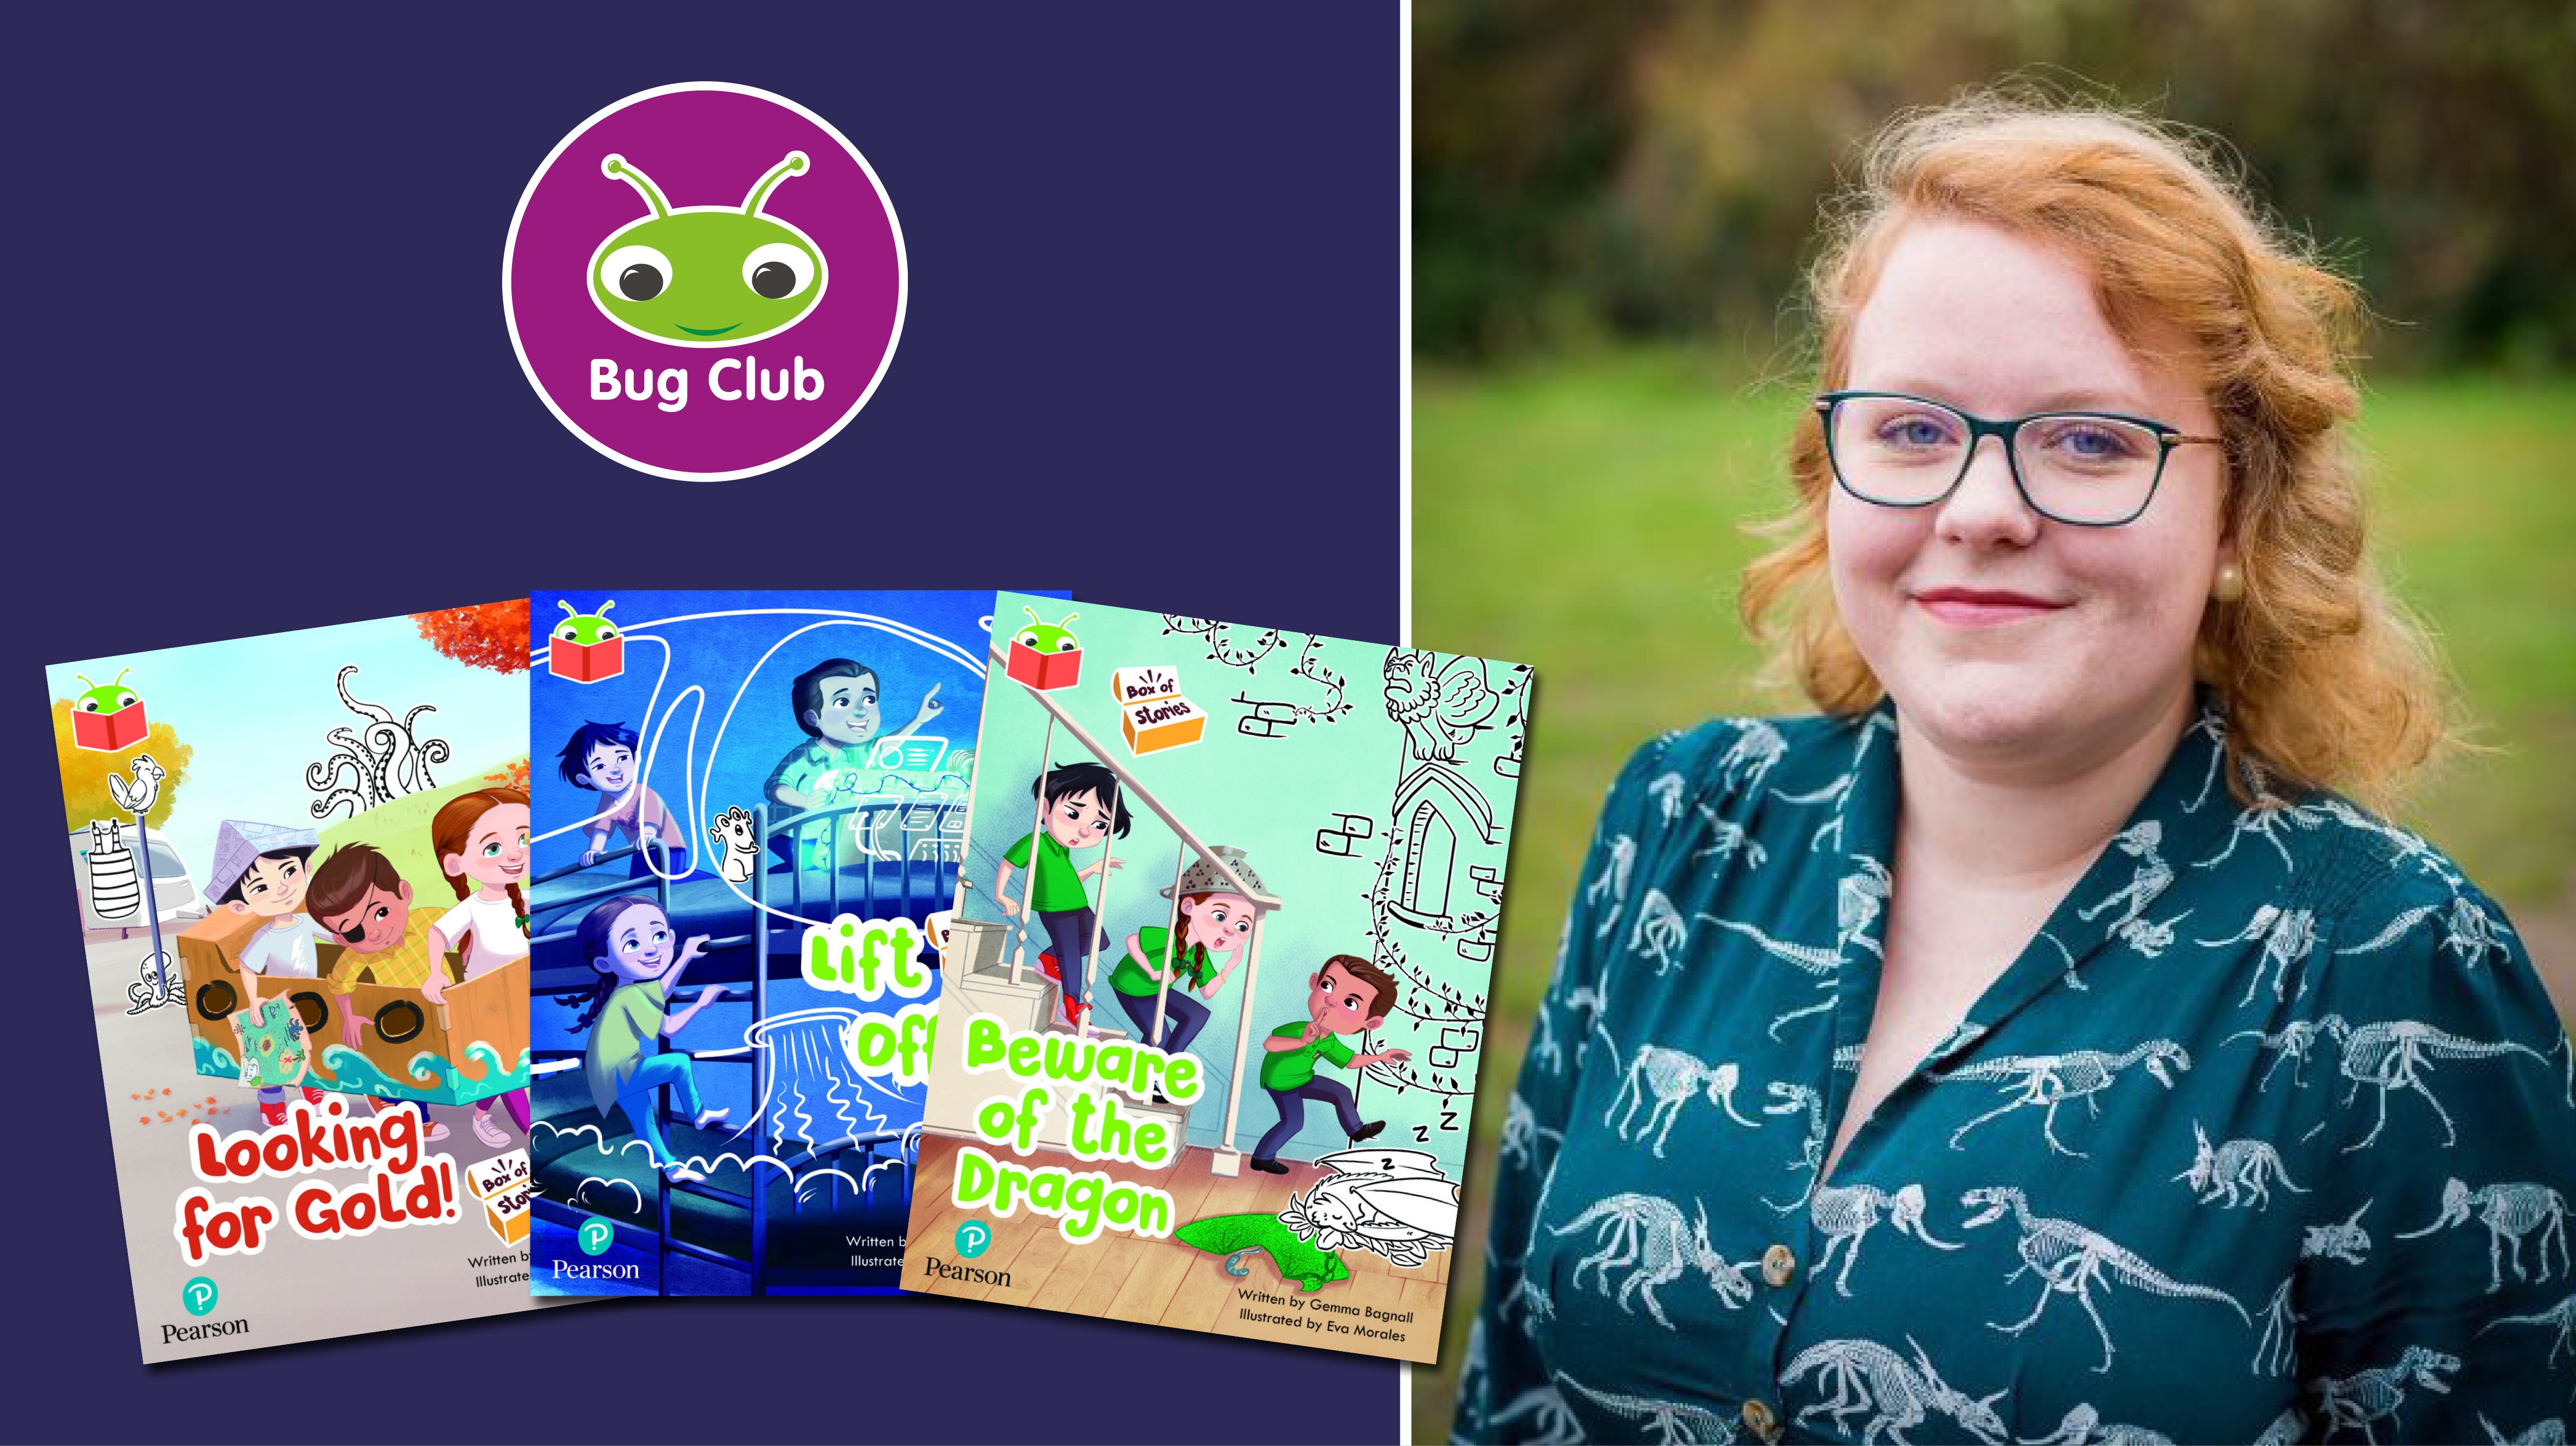 Picture of Gemma alongside the Bug Club logo and the Bug Club books she wrote